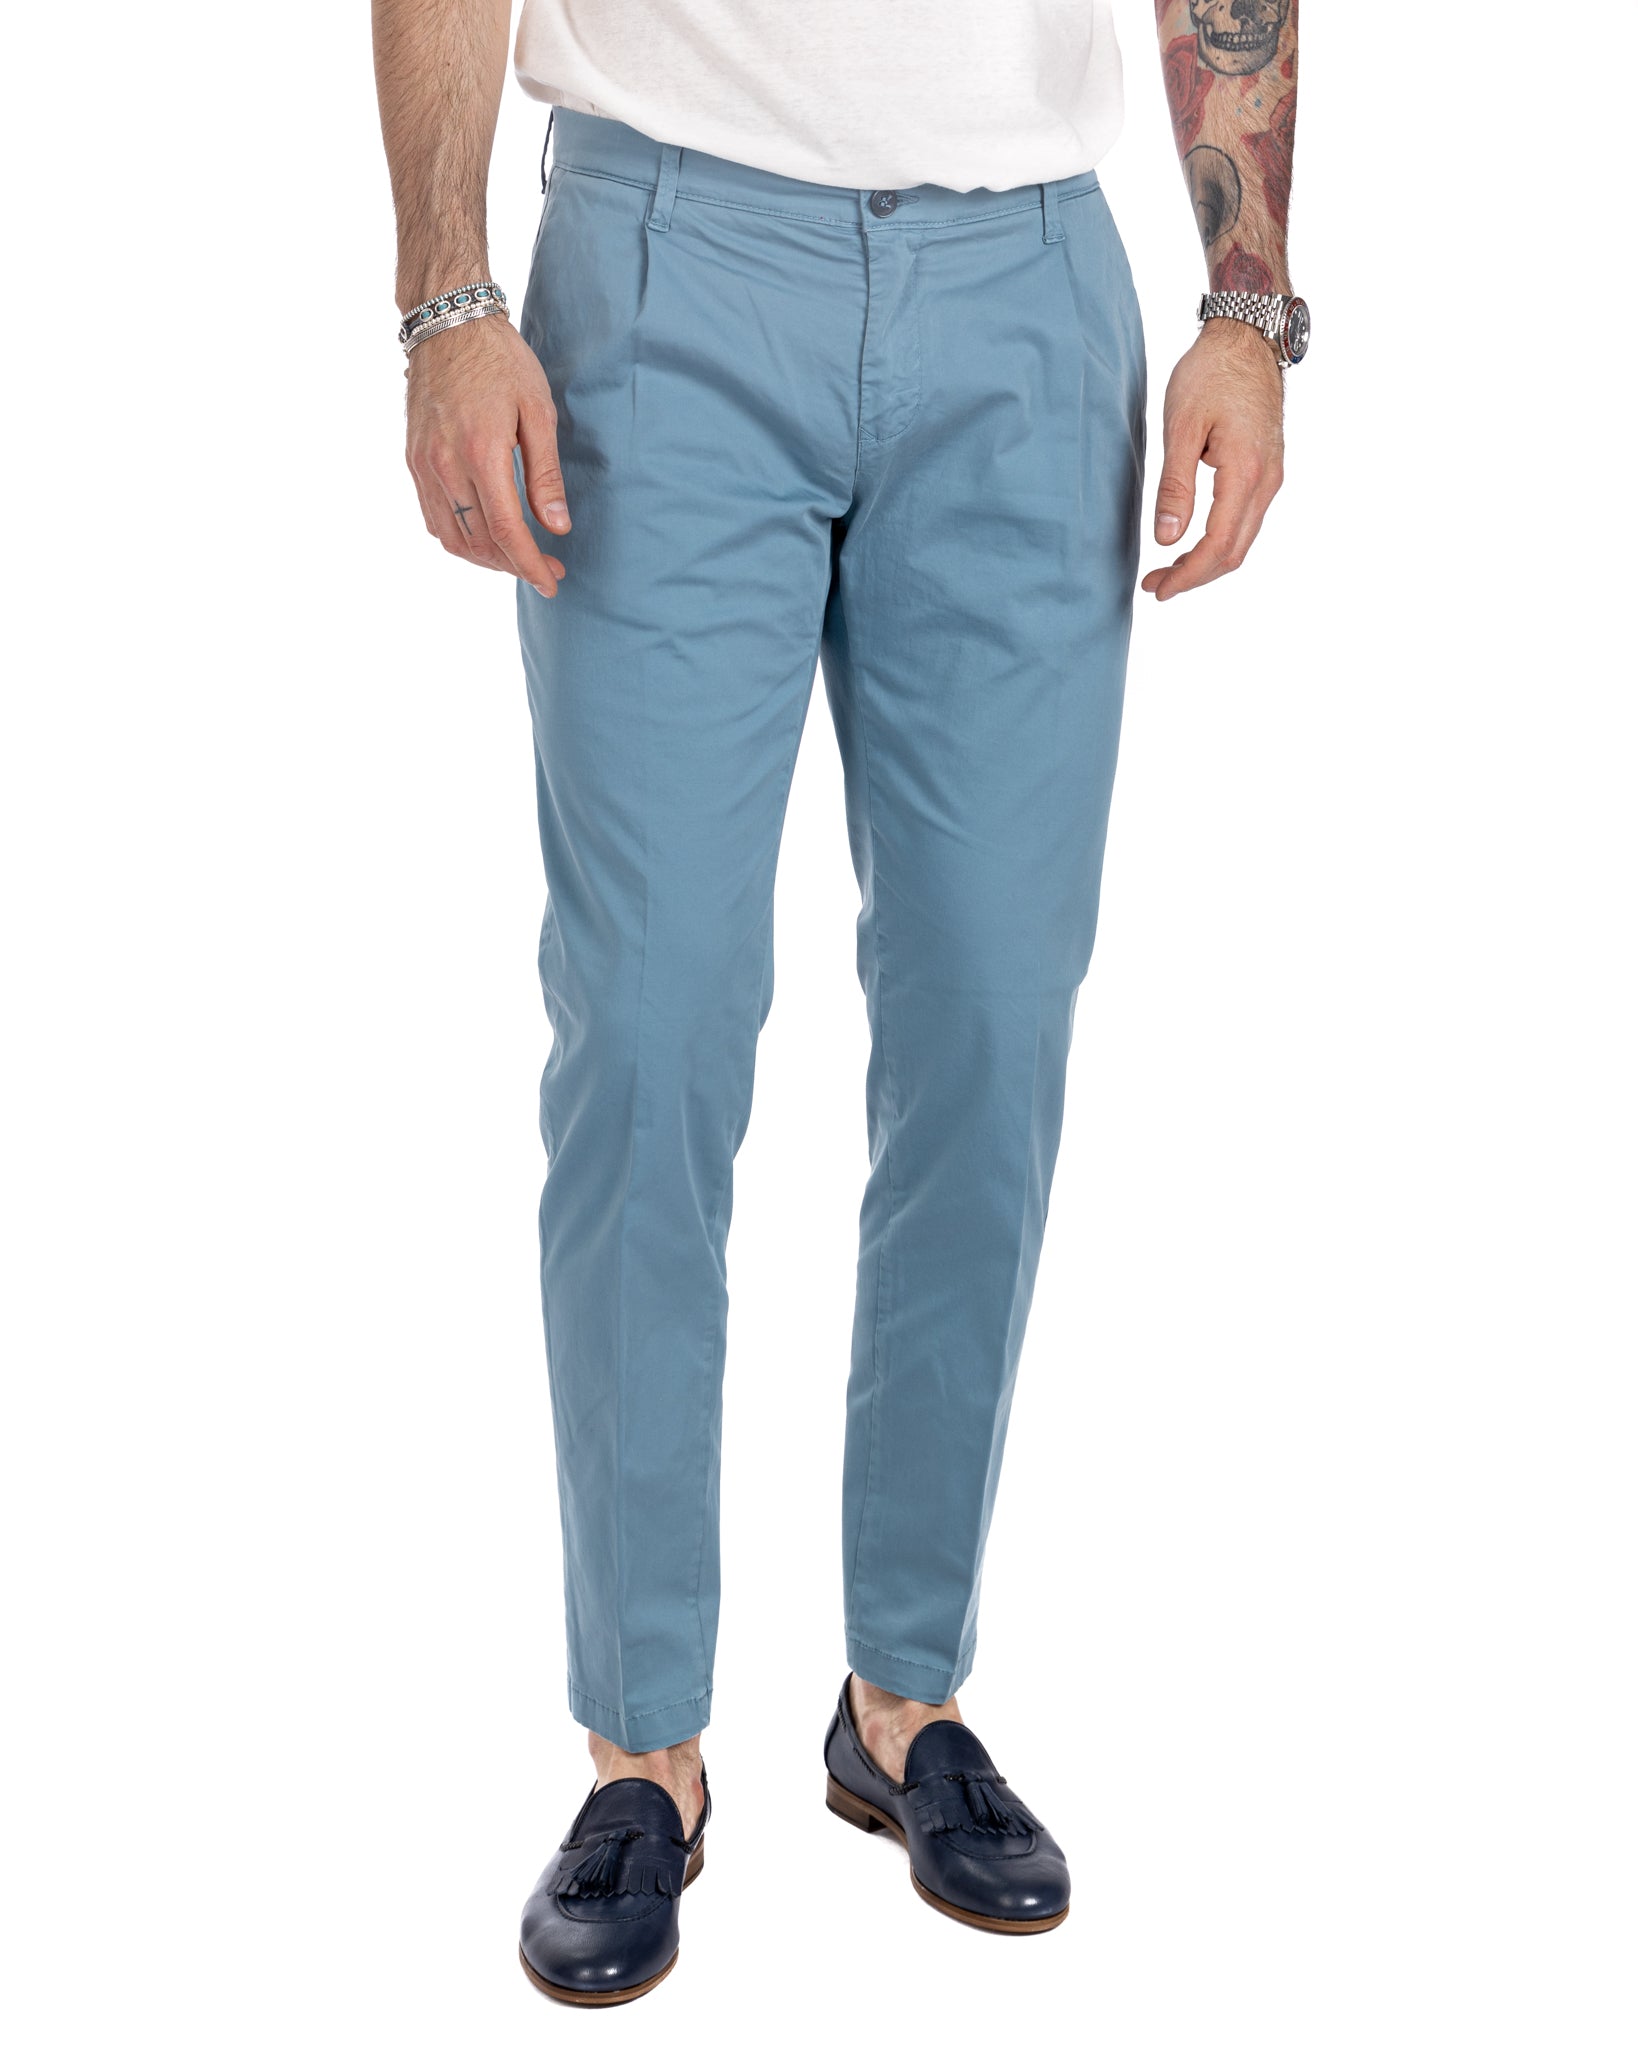 Miles - trousers with teal pleats